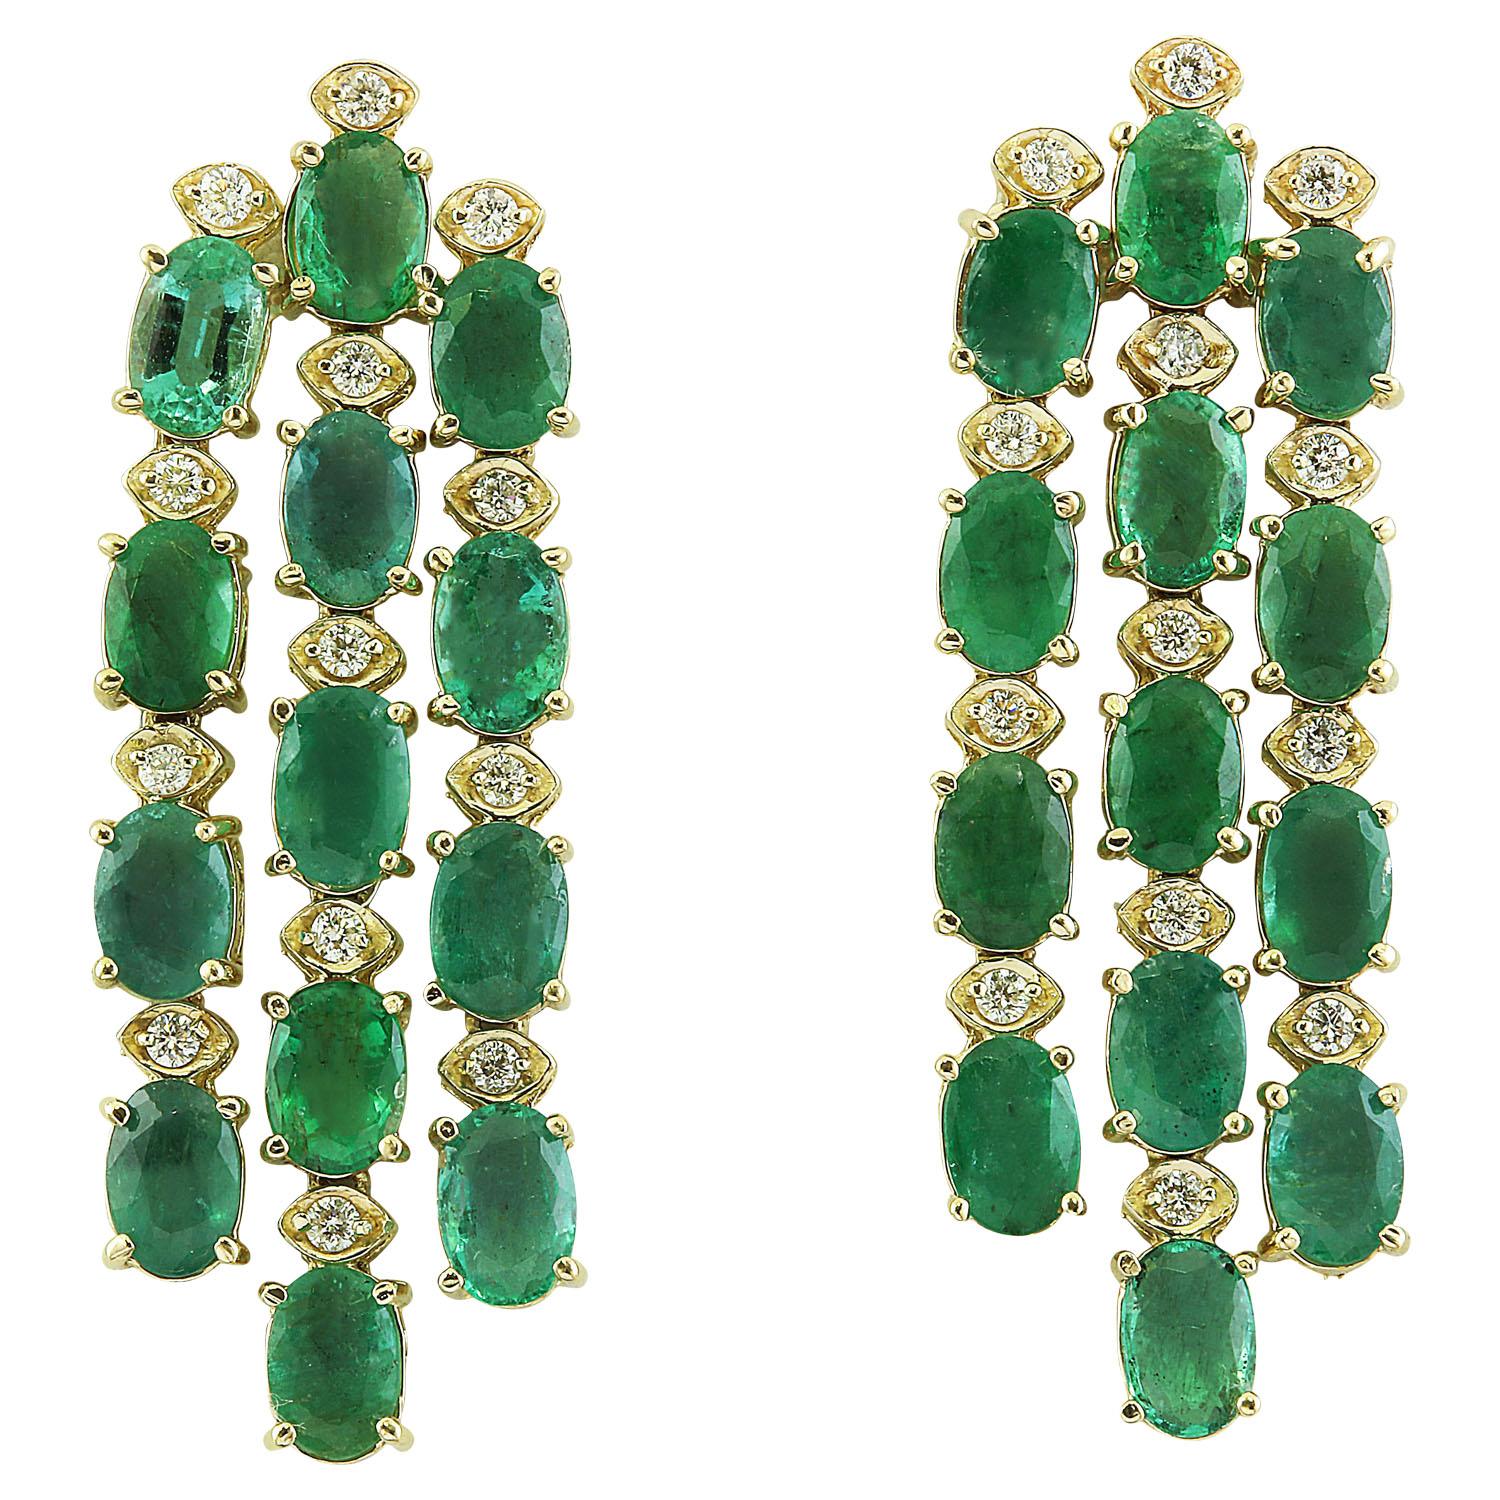 12.50 Carat Natural Emerald 14 Karat Solid Yellow Gold Diamond Earrings
Stamped: 14K 
Total Earrings Weight: 9 Grams 
Emerald Weight: 12.00 Carat (6.00x4.00 Millimeters) 
Treatment: Oiling
Diamond Weight: 0.50 Carat (F-G Color, VS2-SI1